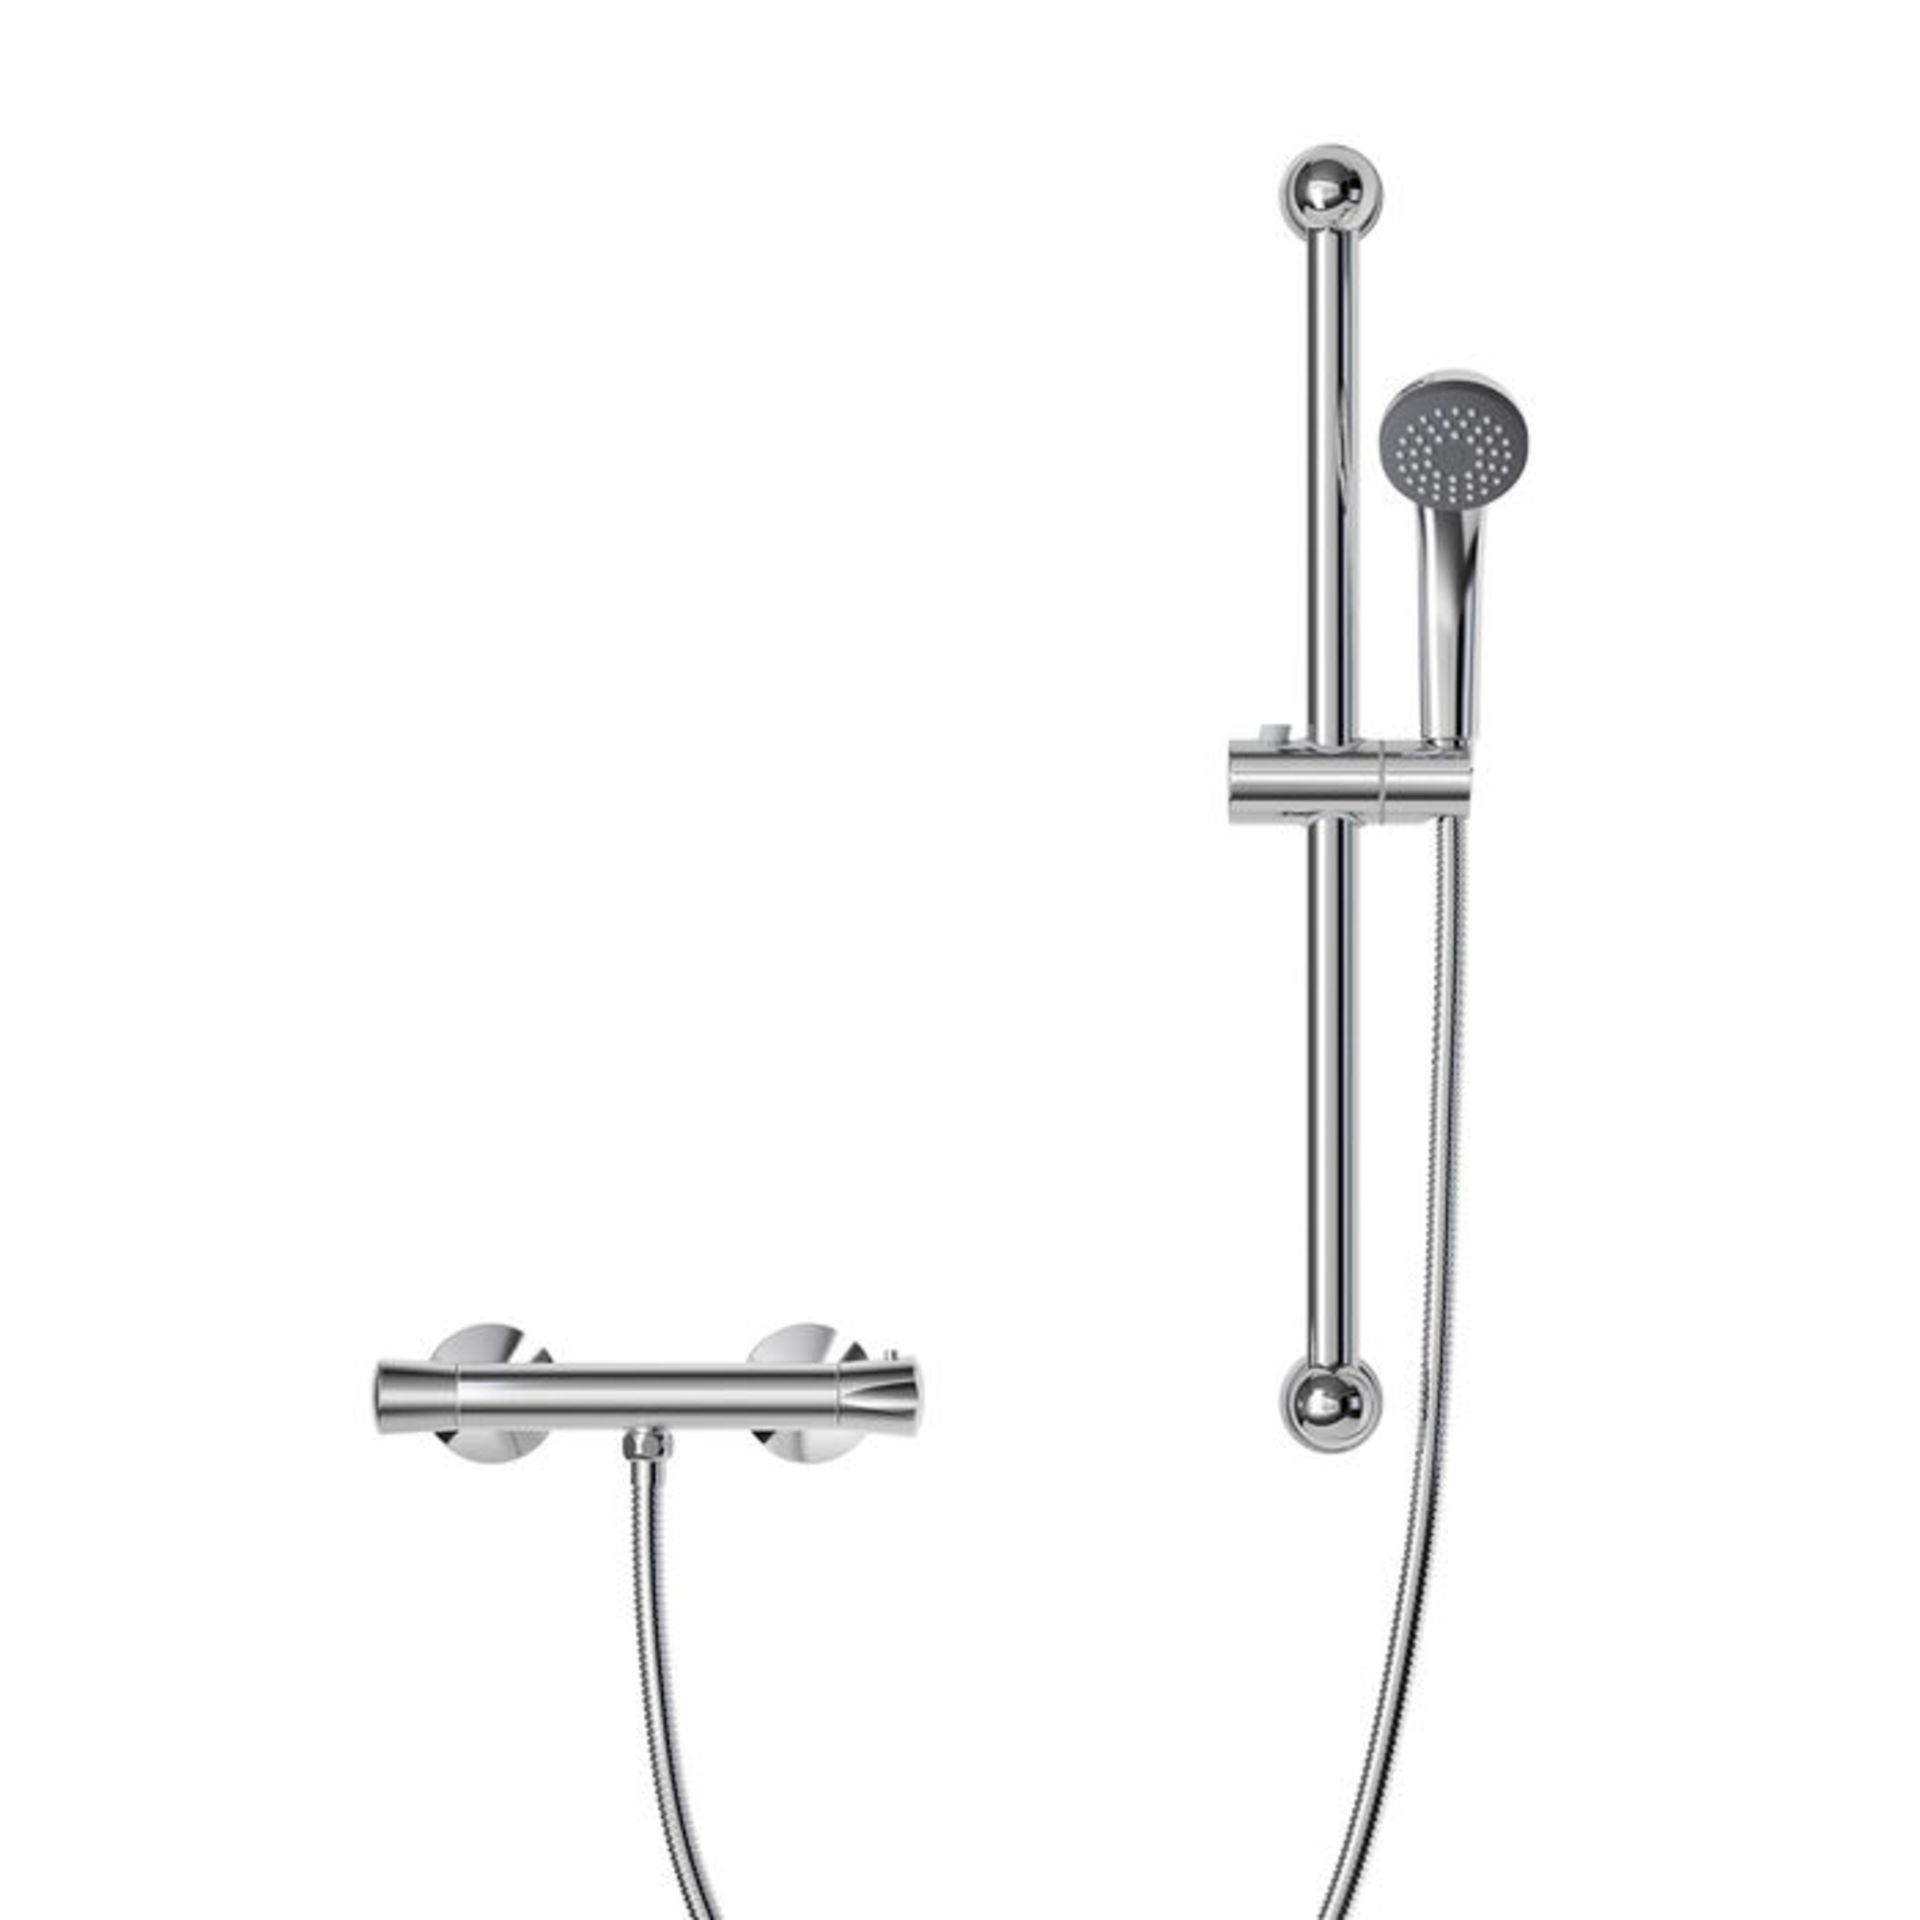 (EW99) Round Bar Mixer Kit. Thermostatic benefits allows complete control over the temperature and - Image 2 of 2